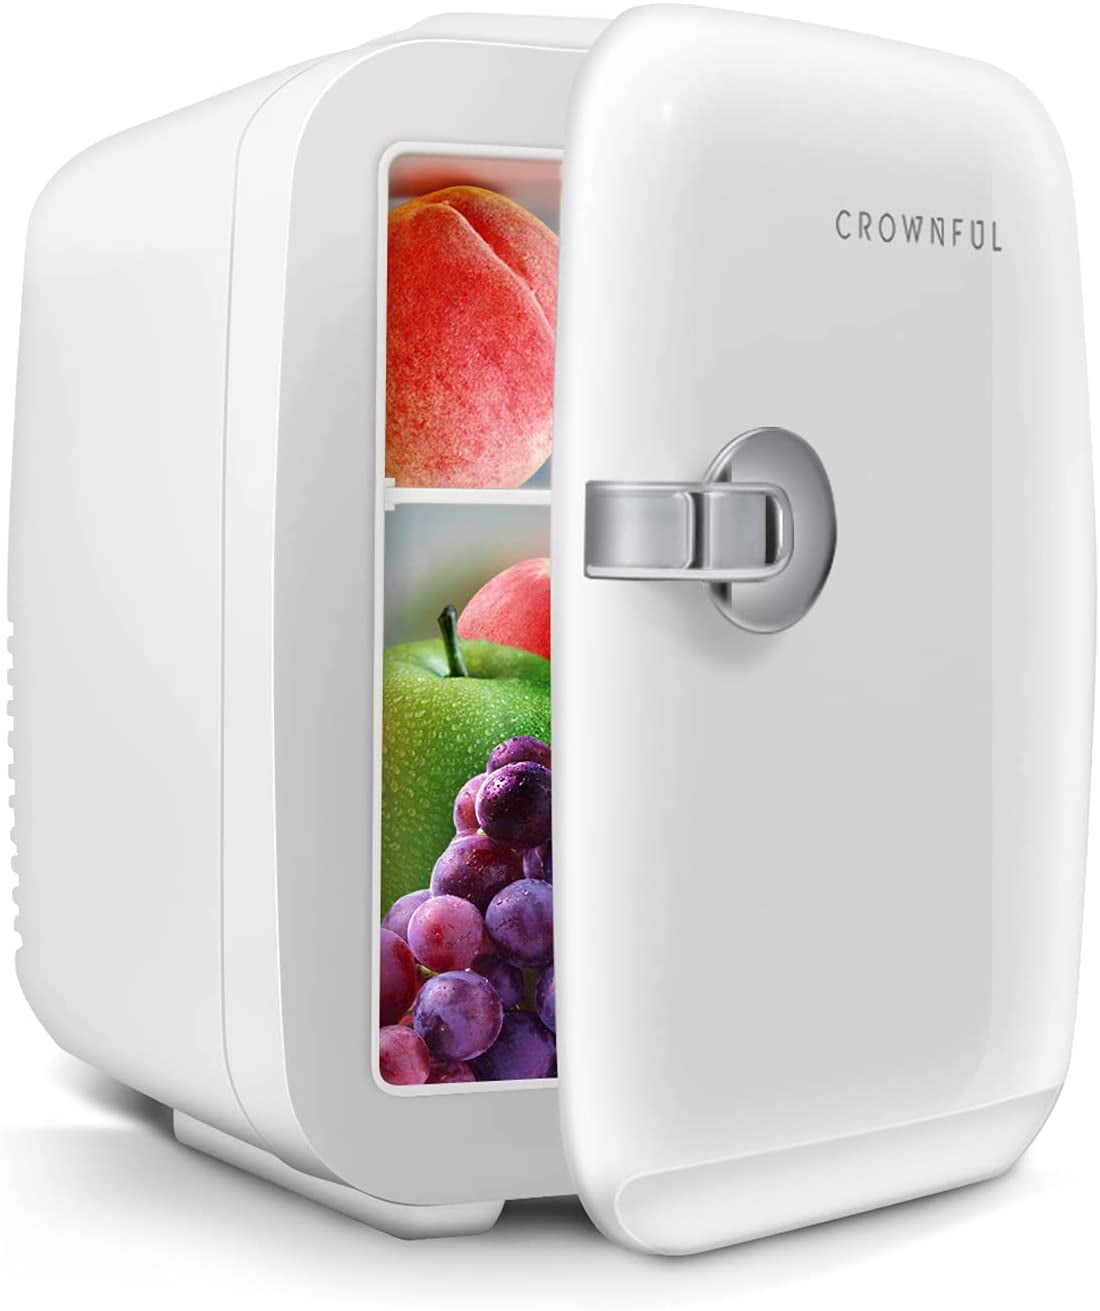  CROWNFUL Mini Fridge, 10 Liter/12 Can Portable Cooler and  Warmer Personal Fridge for Skin Care, Food, Medications, Great for Bedroom,  Office, Dorm, Car, ETL Listed (Black) : Home & Kitchen